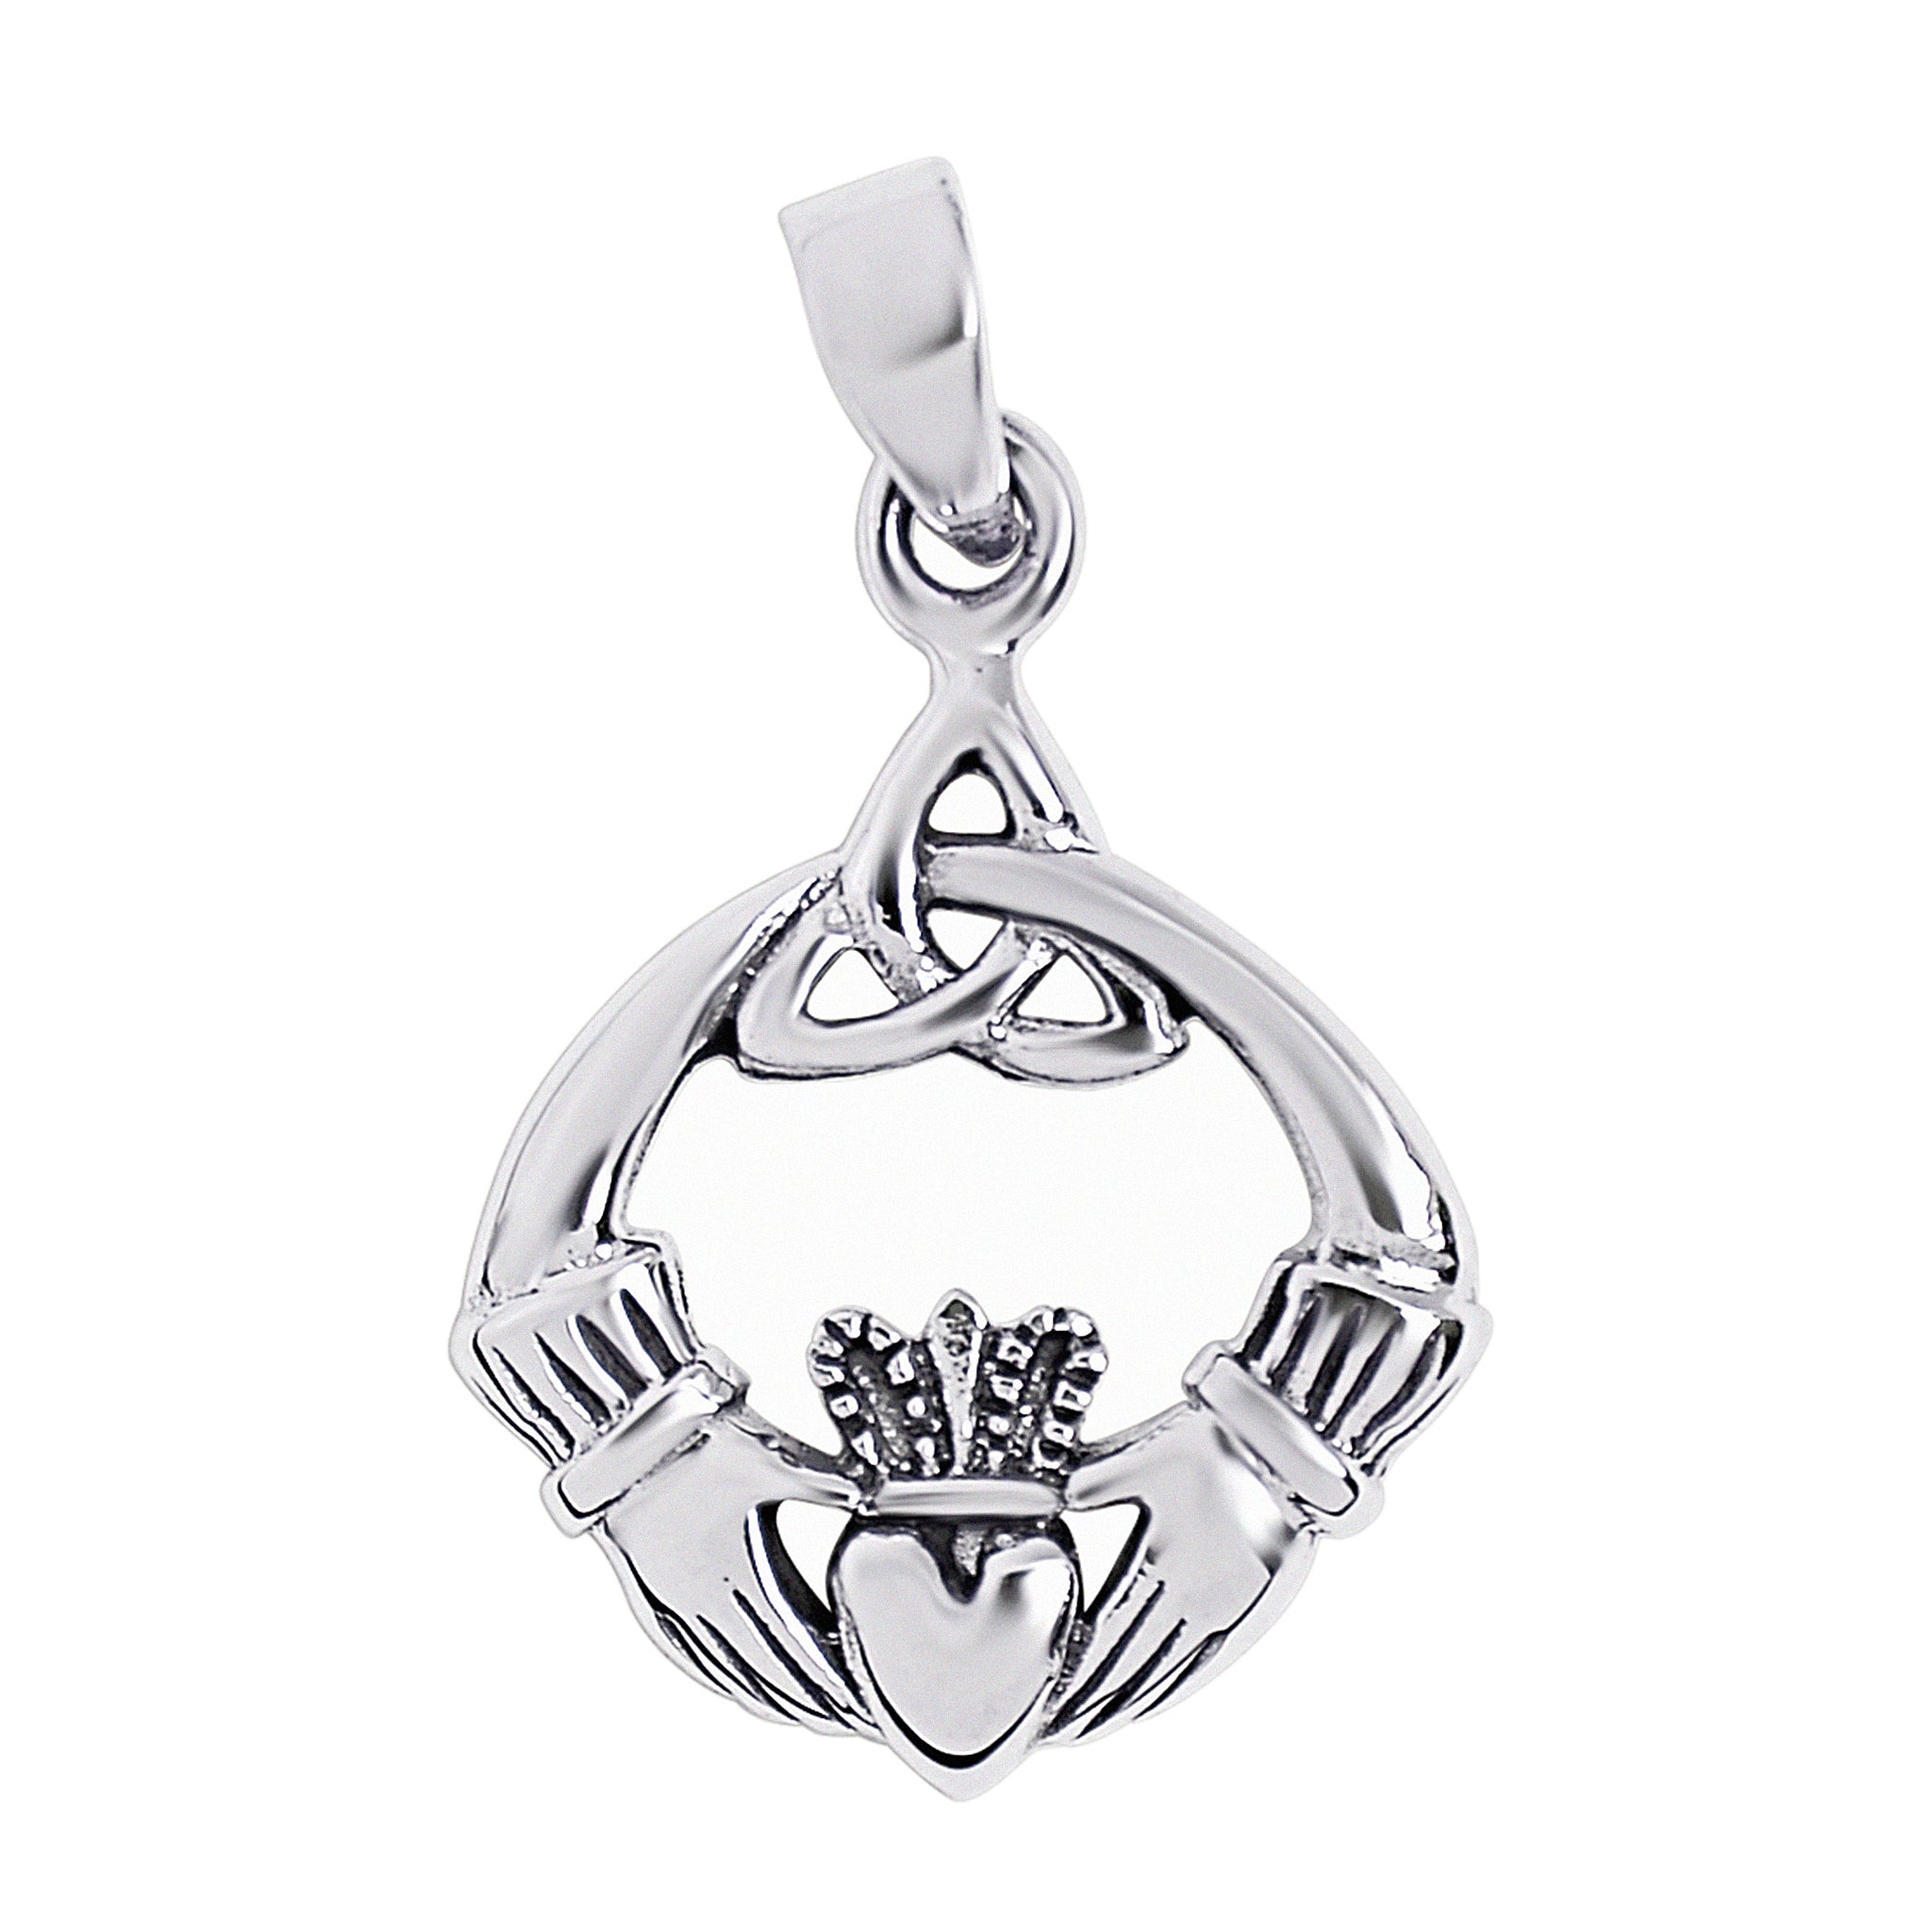 Sterling Silver Celtic Knot Claddagh Pendant / SSP0033-sterling silver pendant- .925 sterling silver pendant- Black Friday Gift- silver pendent- necklace pendent